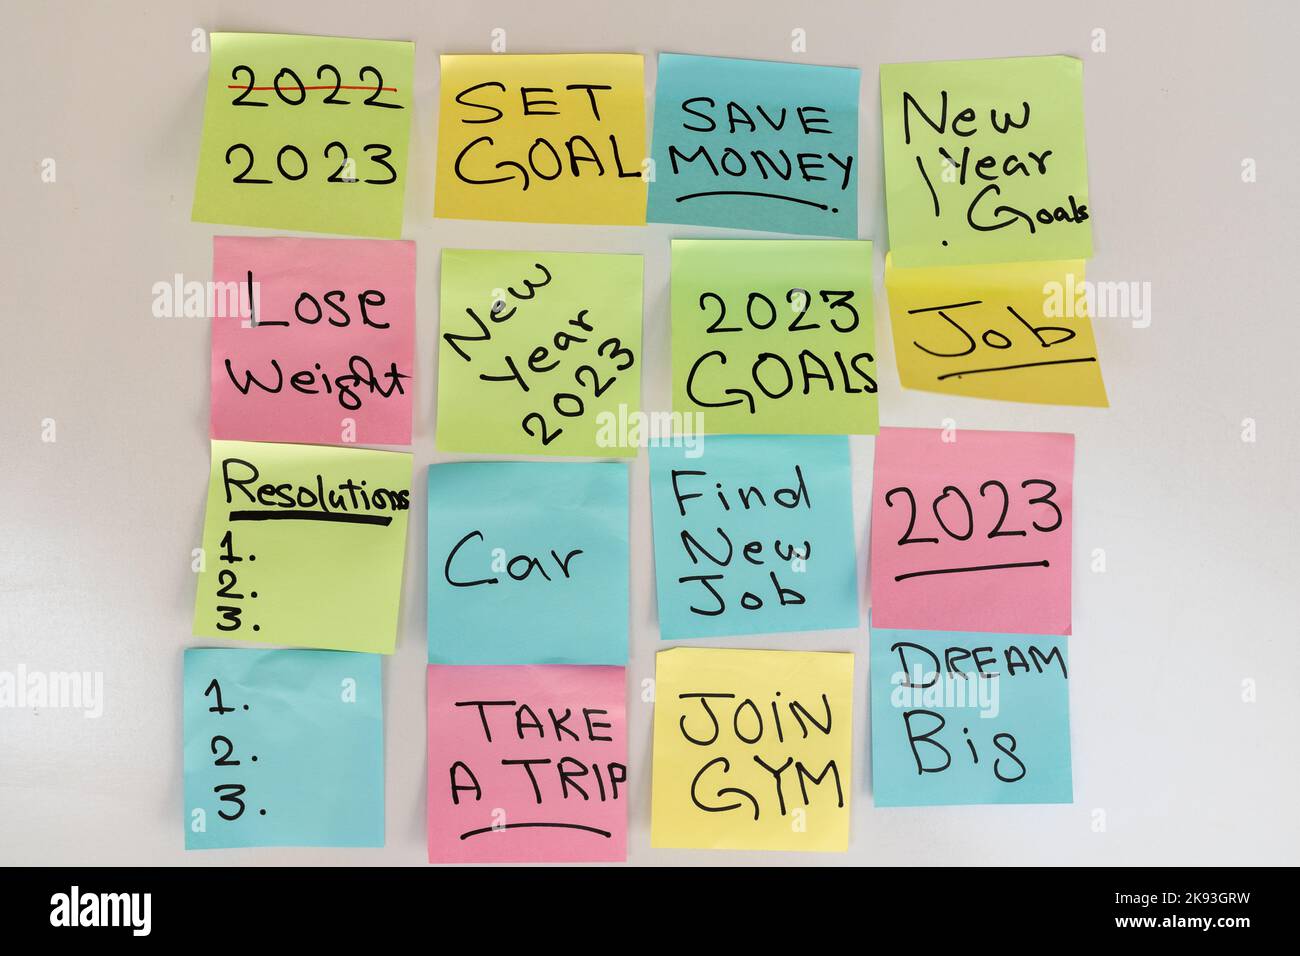 New year 2023 resolutions and goals written on a sticky notes on a white isolated background Stock Photo